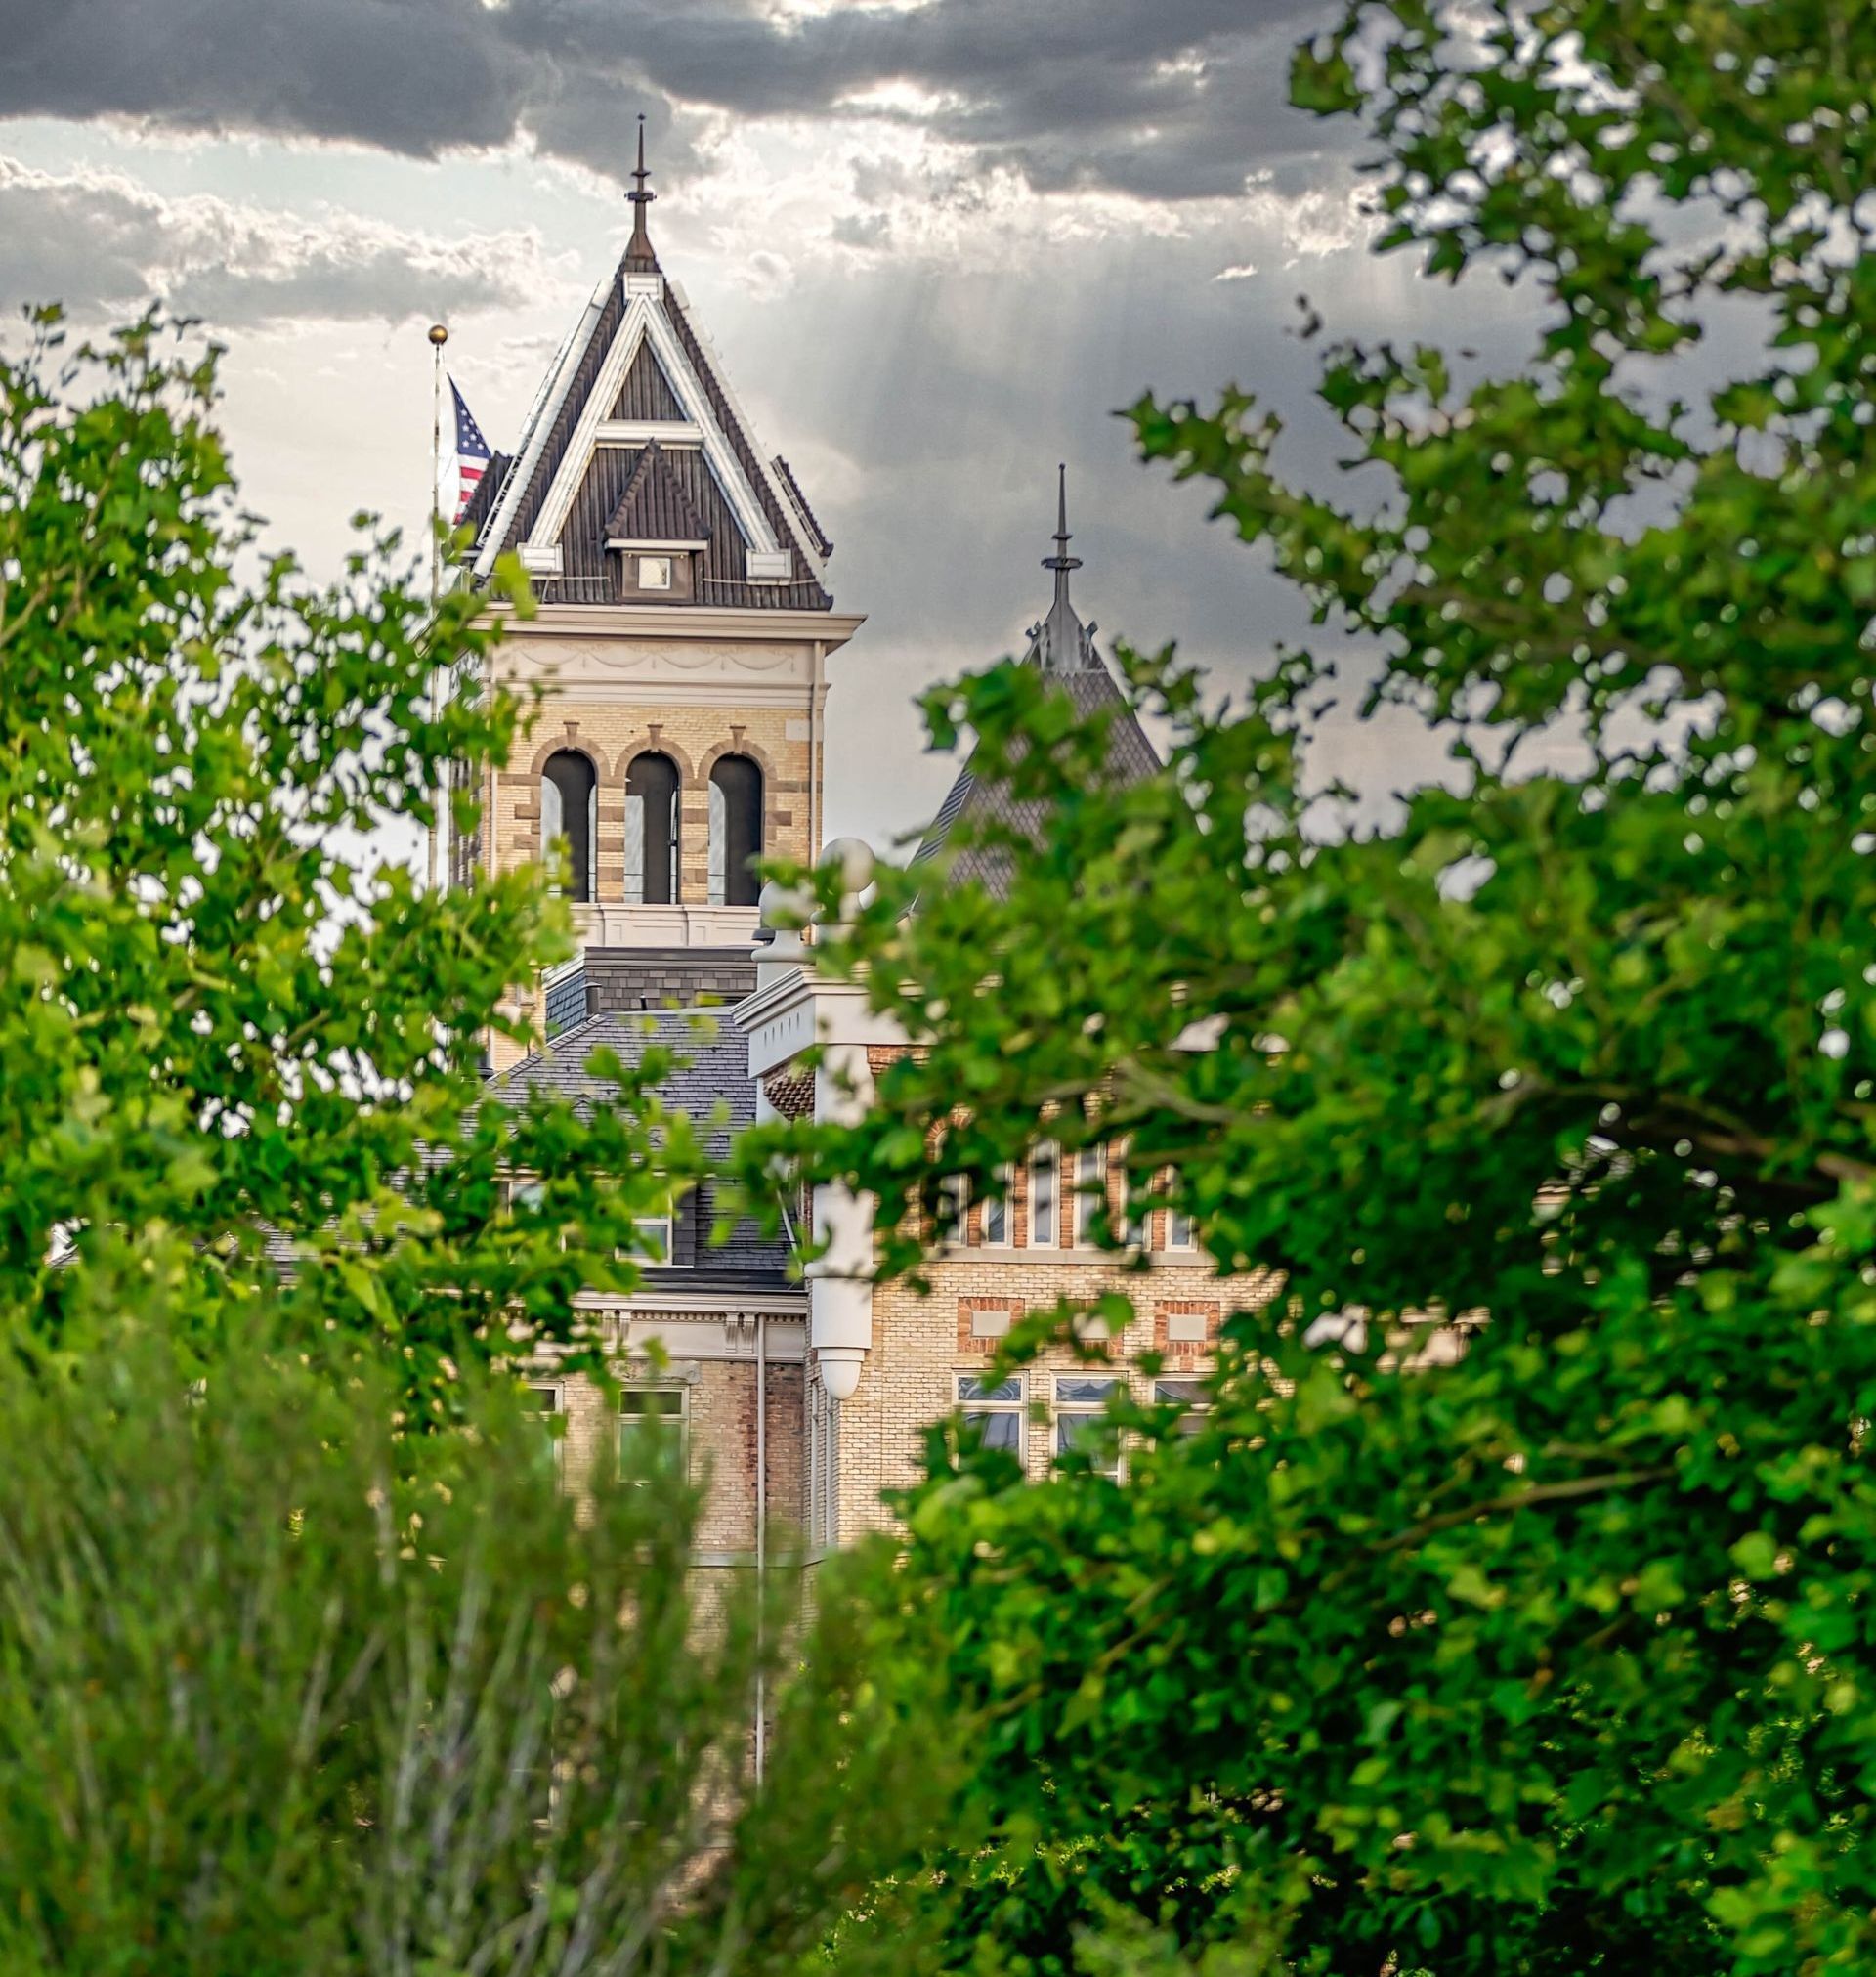 An image of Utah State University's Old Main building with green trees in the foreground and a cloudy sky.